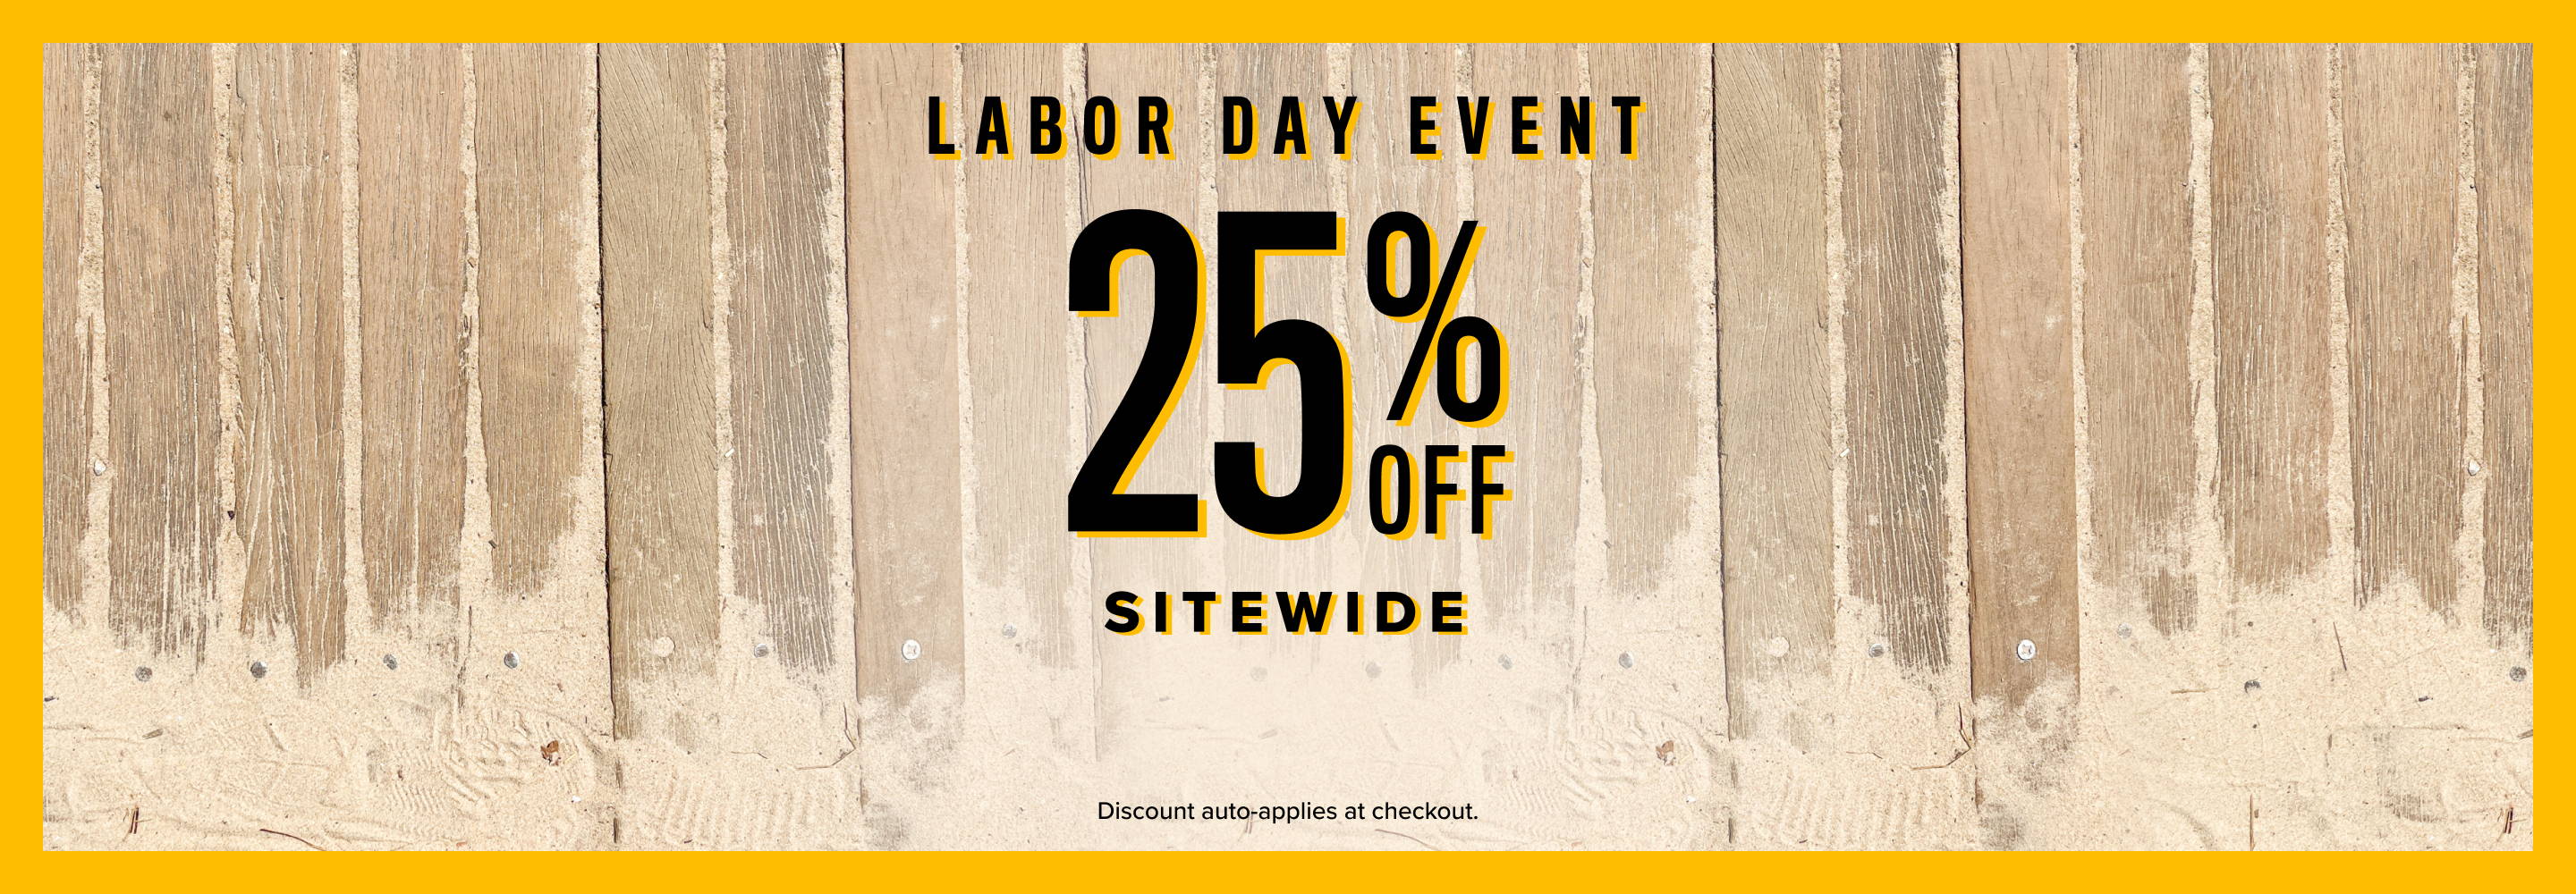 labor day event. 25% off sitewide